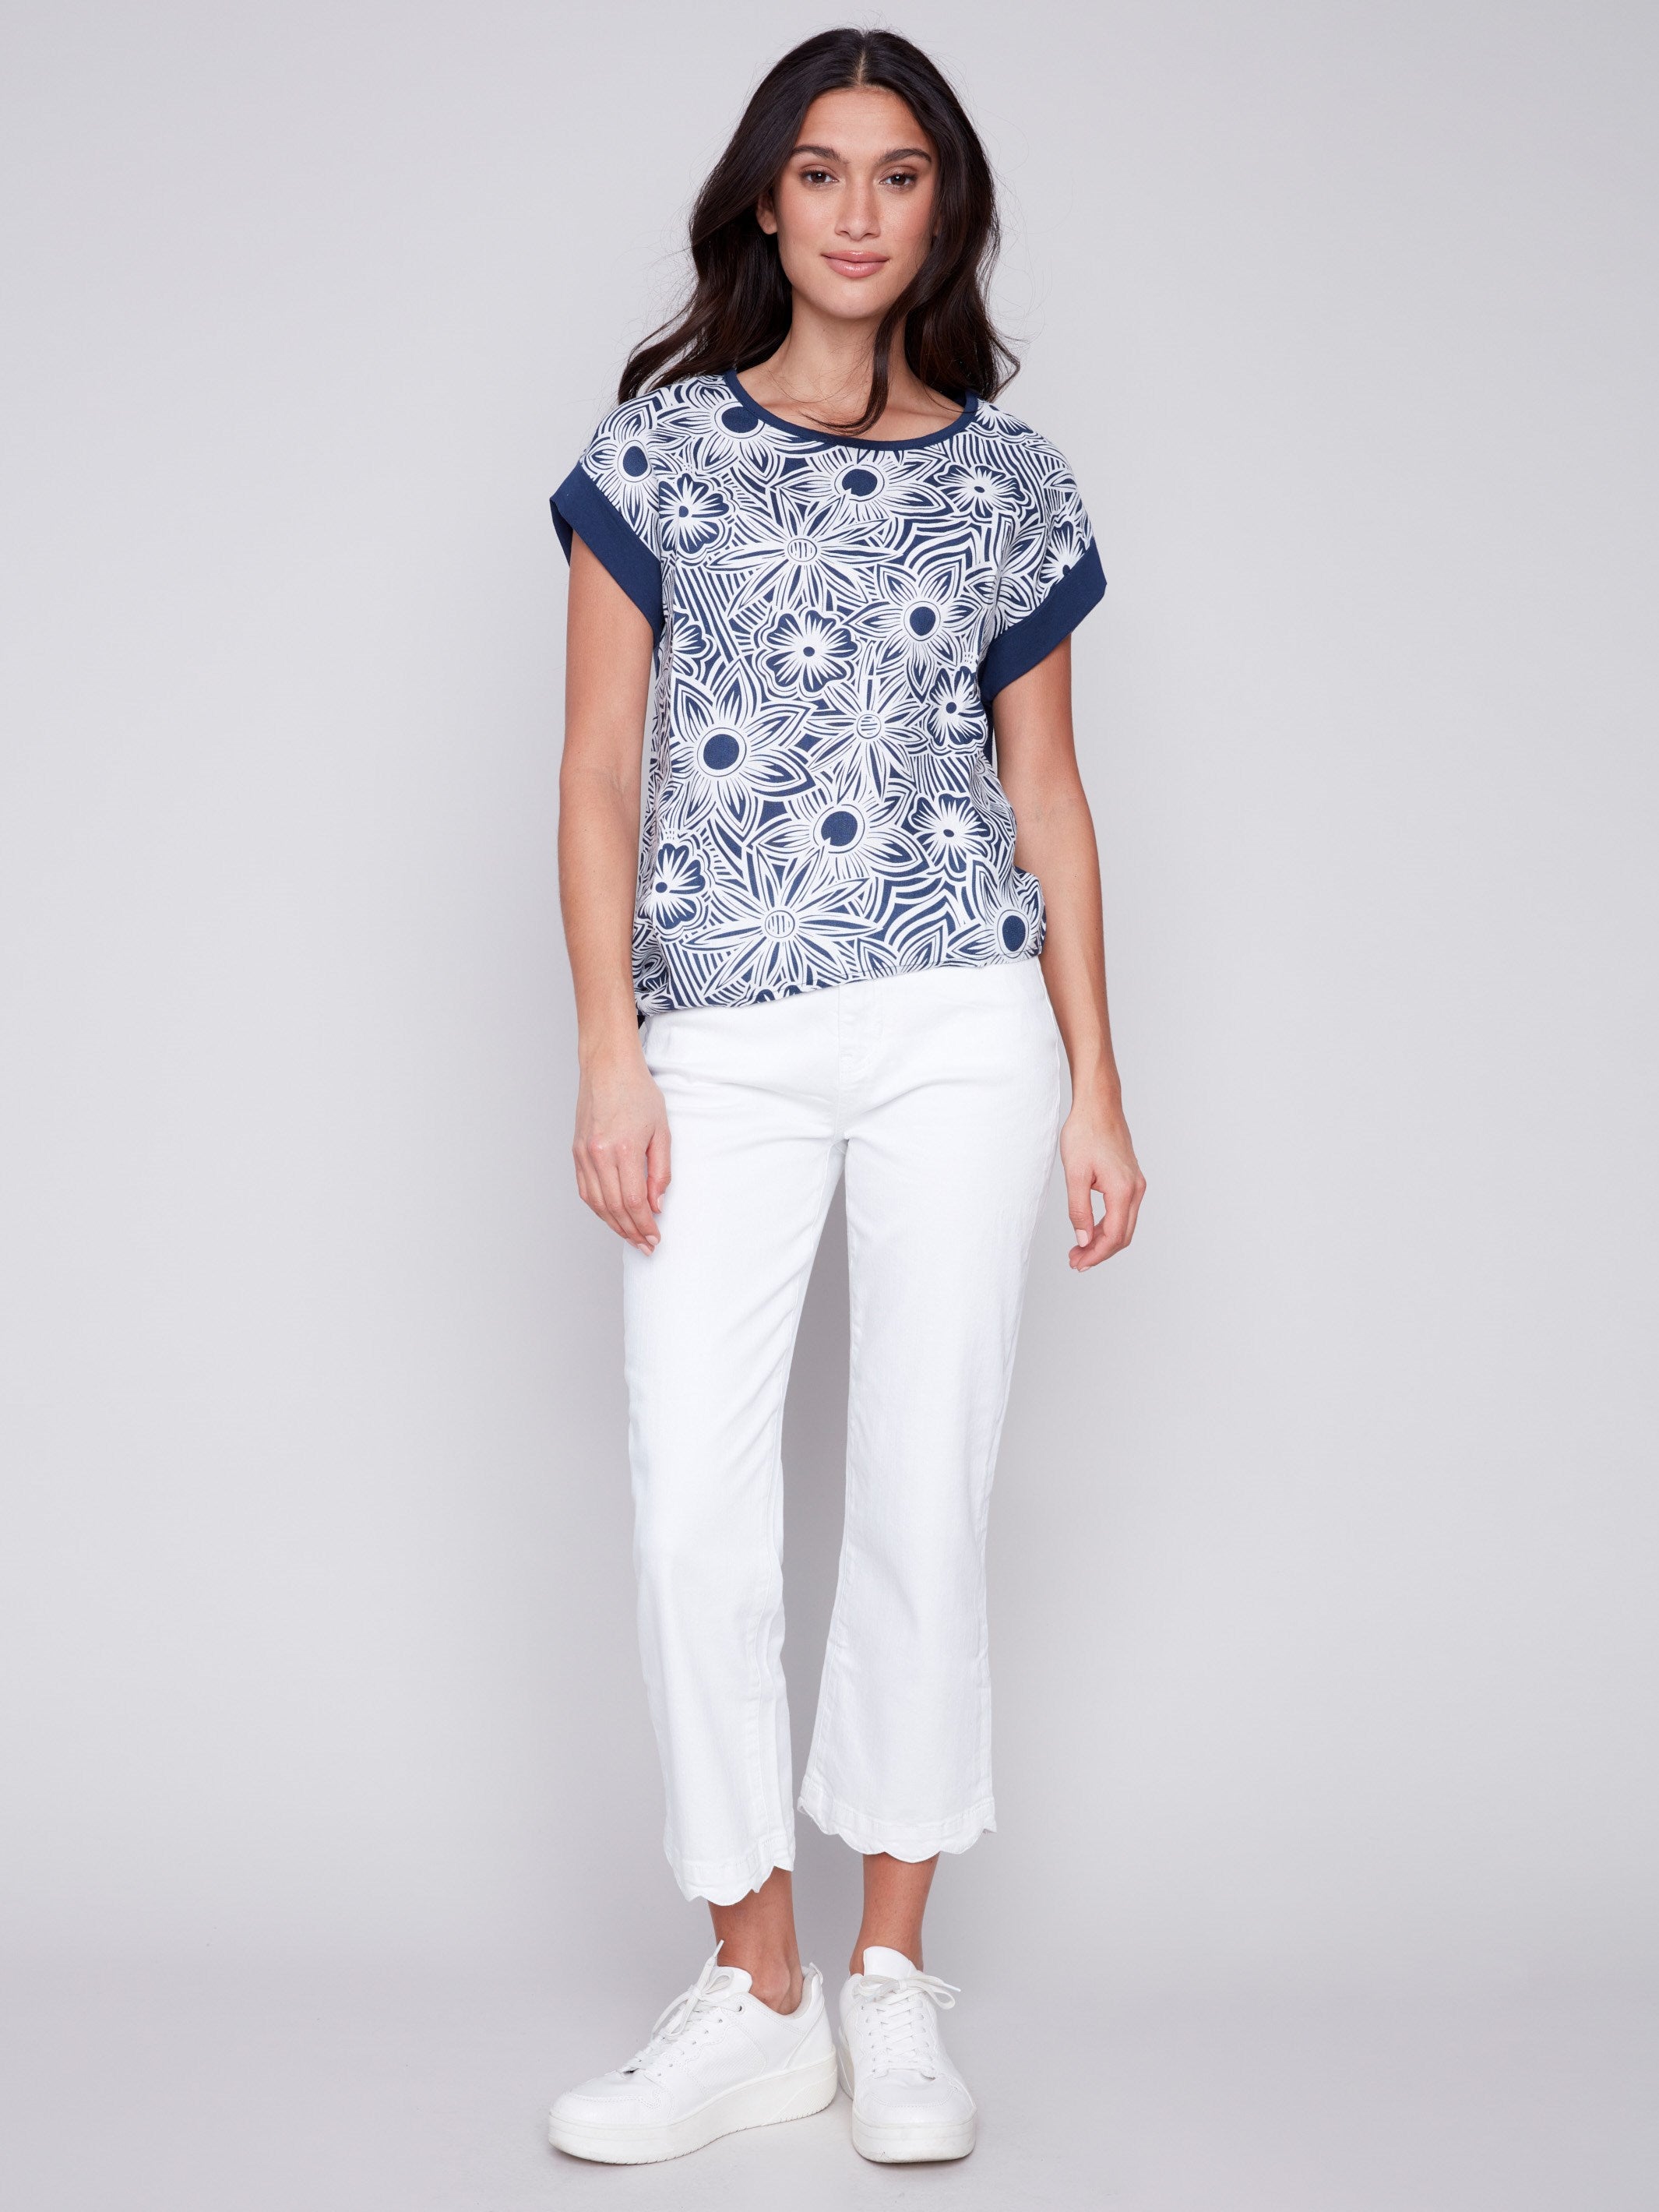 Charlie B Printed Linen Top with Side Tie - Navy - Image 3